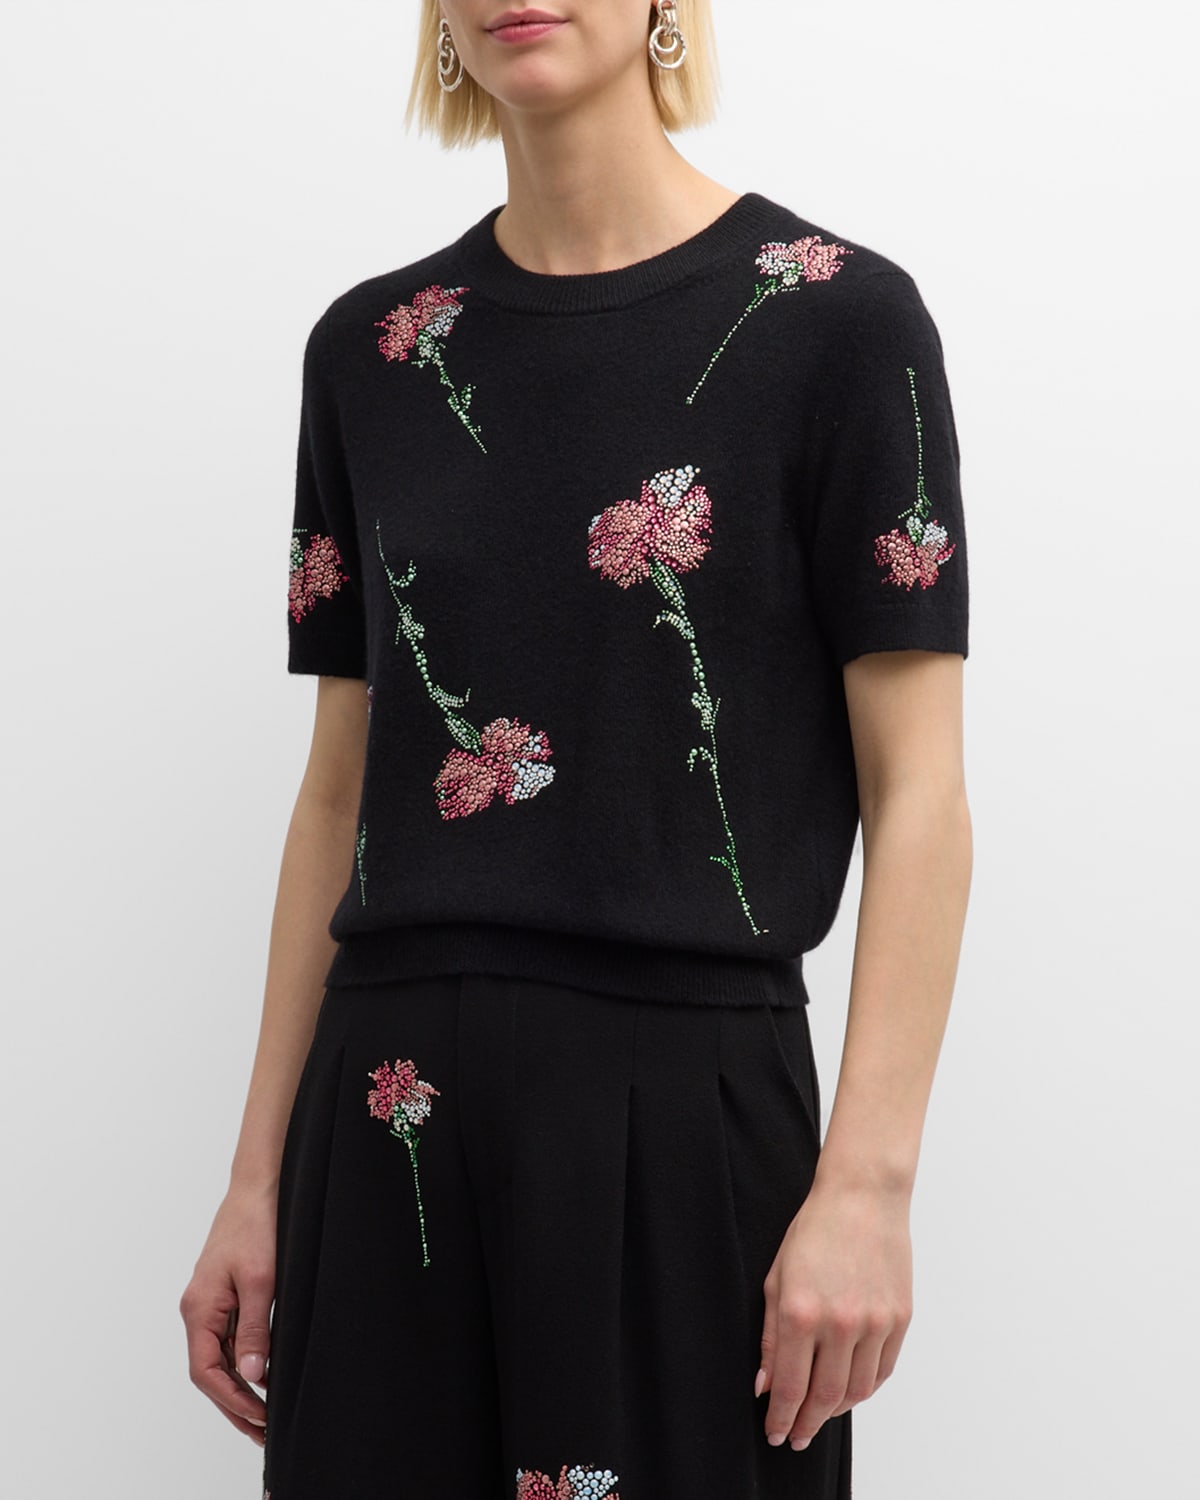 Cecil Beaton Pink Carnation Short-Sleeve Cashmere Pullover